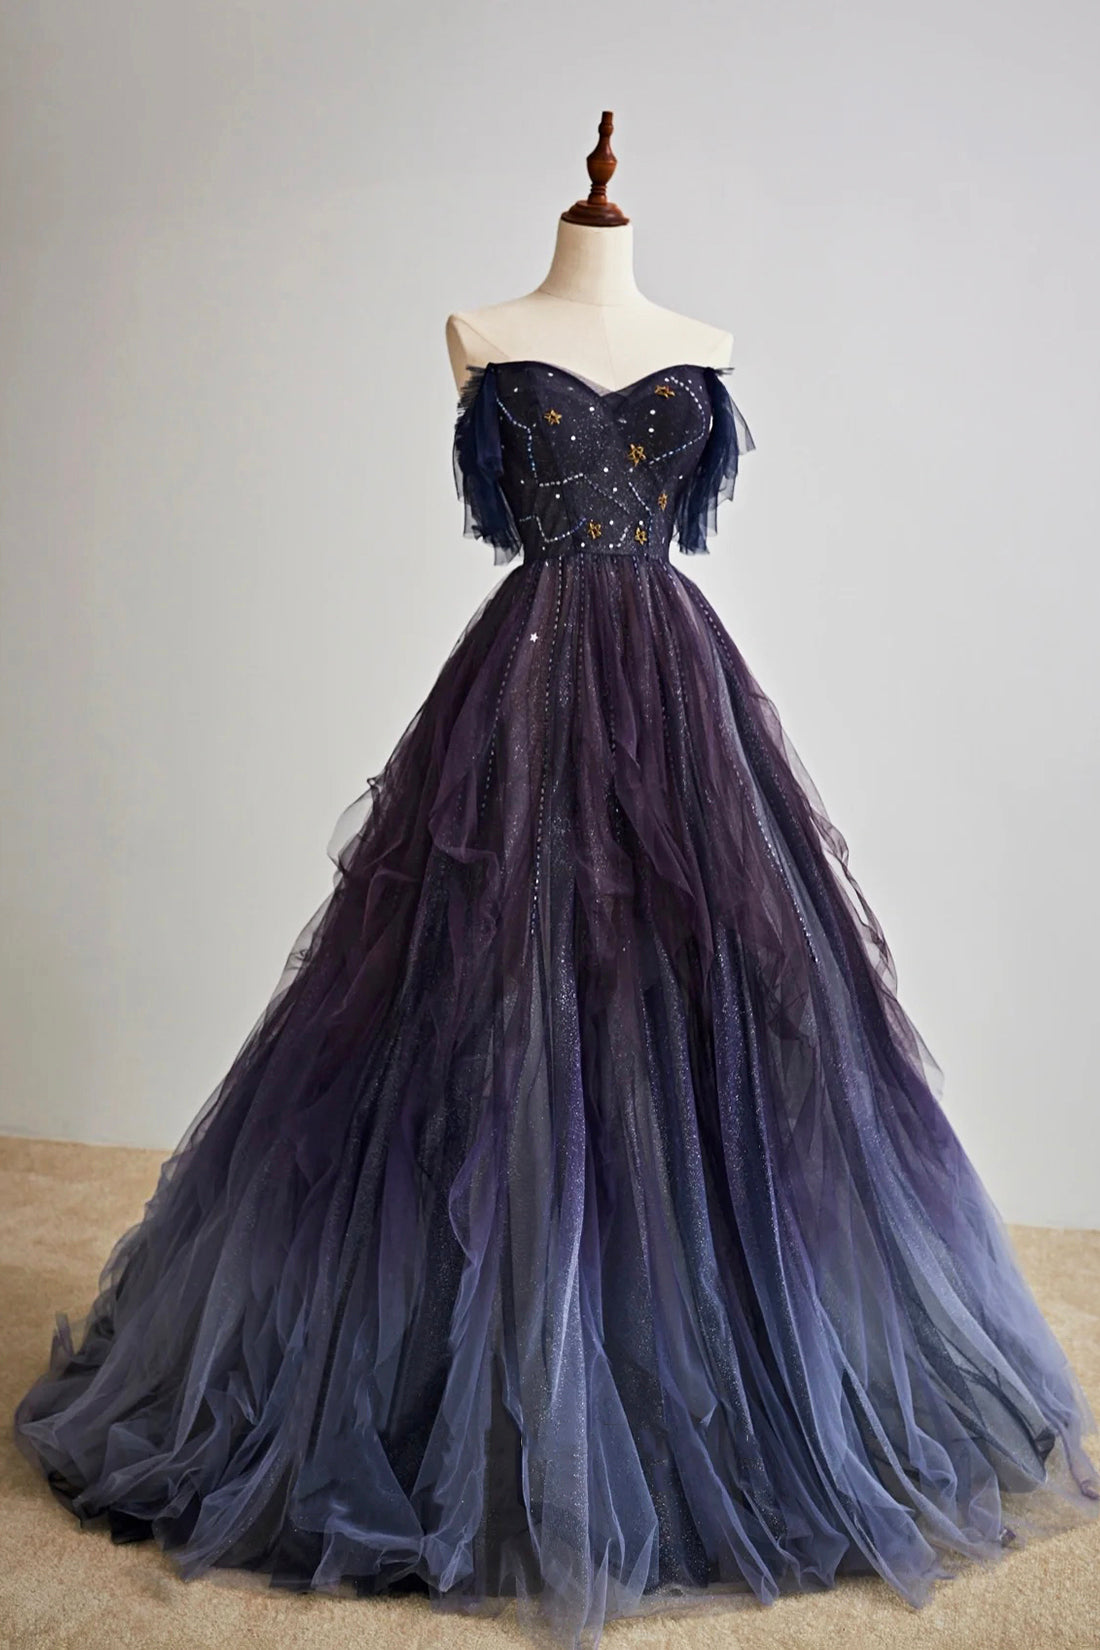 Purple Gradient Tulle Long Prom Dress, Beautiful A-Line Evening Party Dress with Beaded